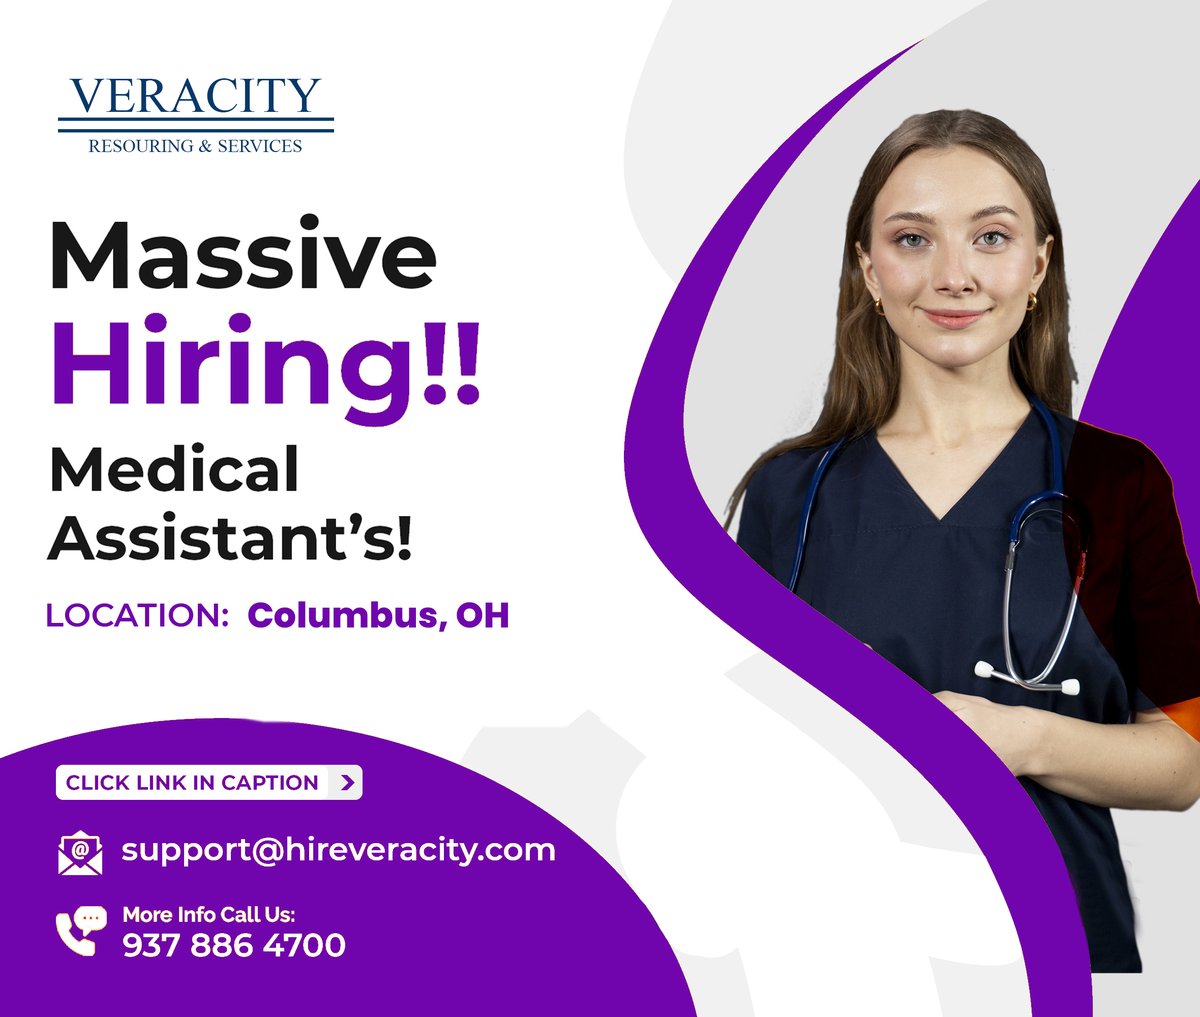 We see that you are a compassionate Medical Assistant seeking a fulfilling career opportunity in Columbus, Ohio? 
Click here to apply: veracityrs.com/applicant/jobs…

#MedicalAssistant #Hiring #NursingCare #JoinOurTeam #healthcare #HealthJobs #healthcareprofessionals #jobsUSA #ohio